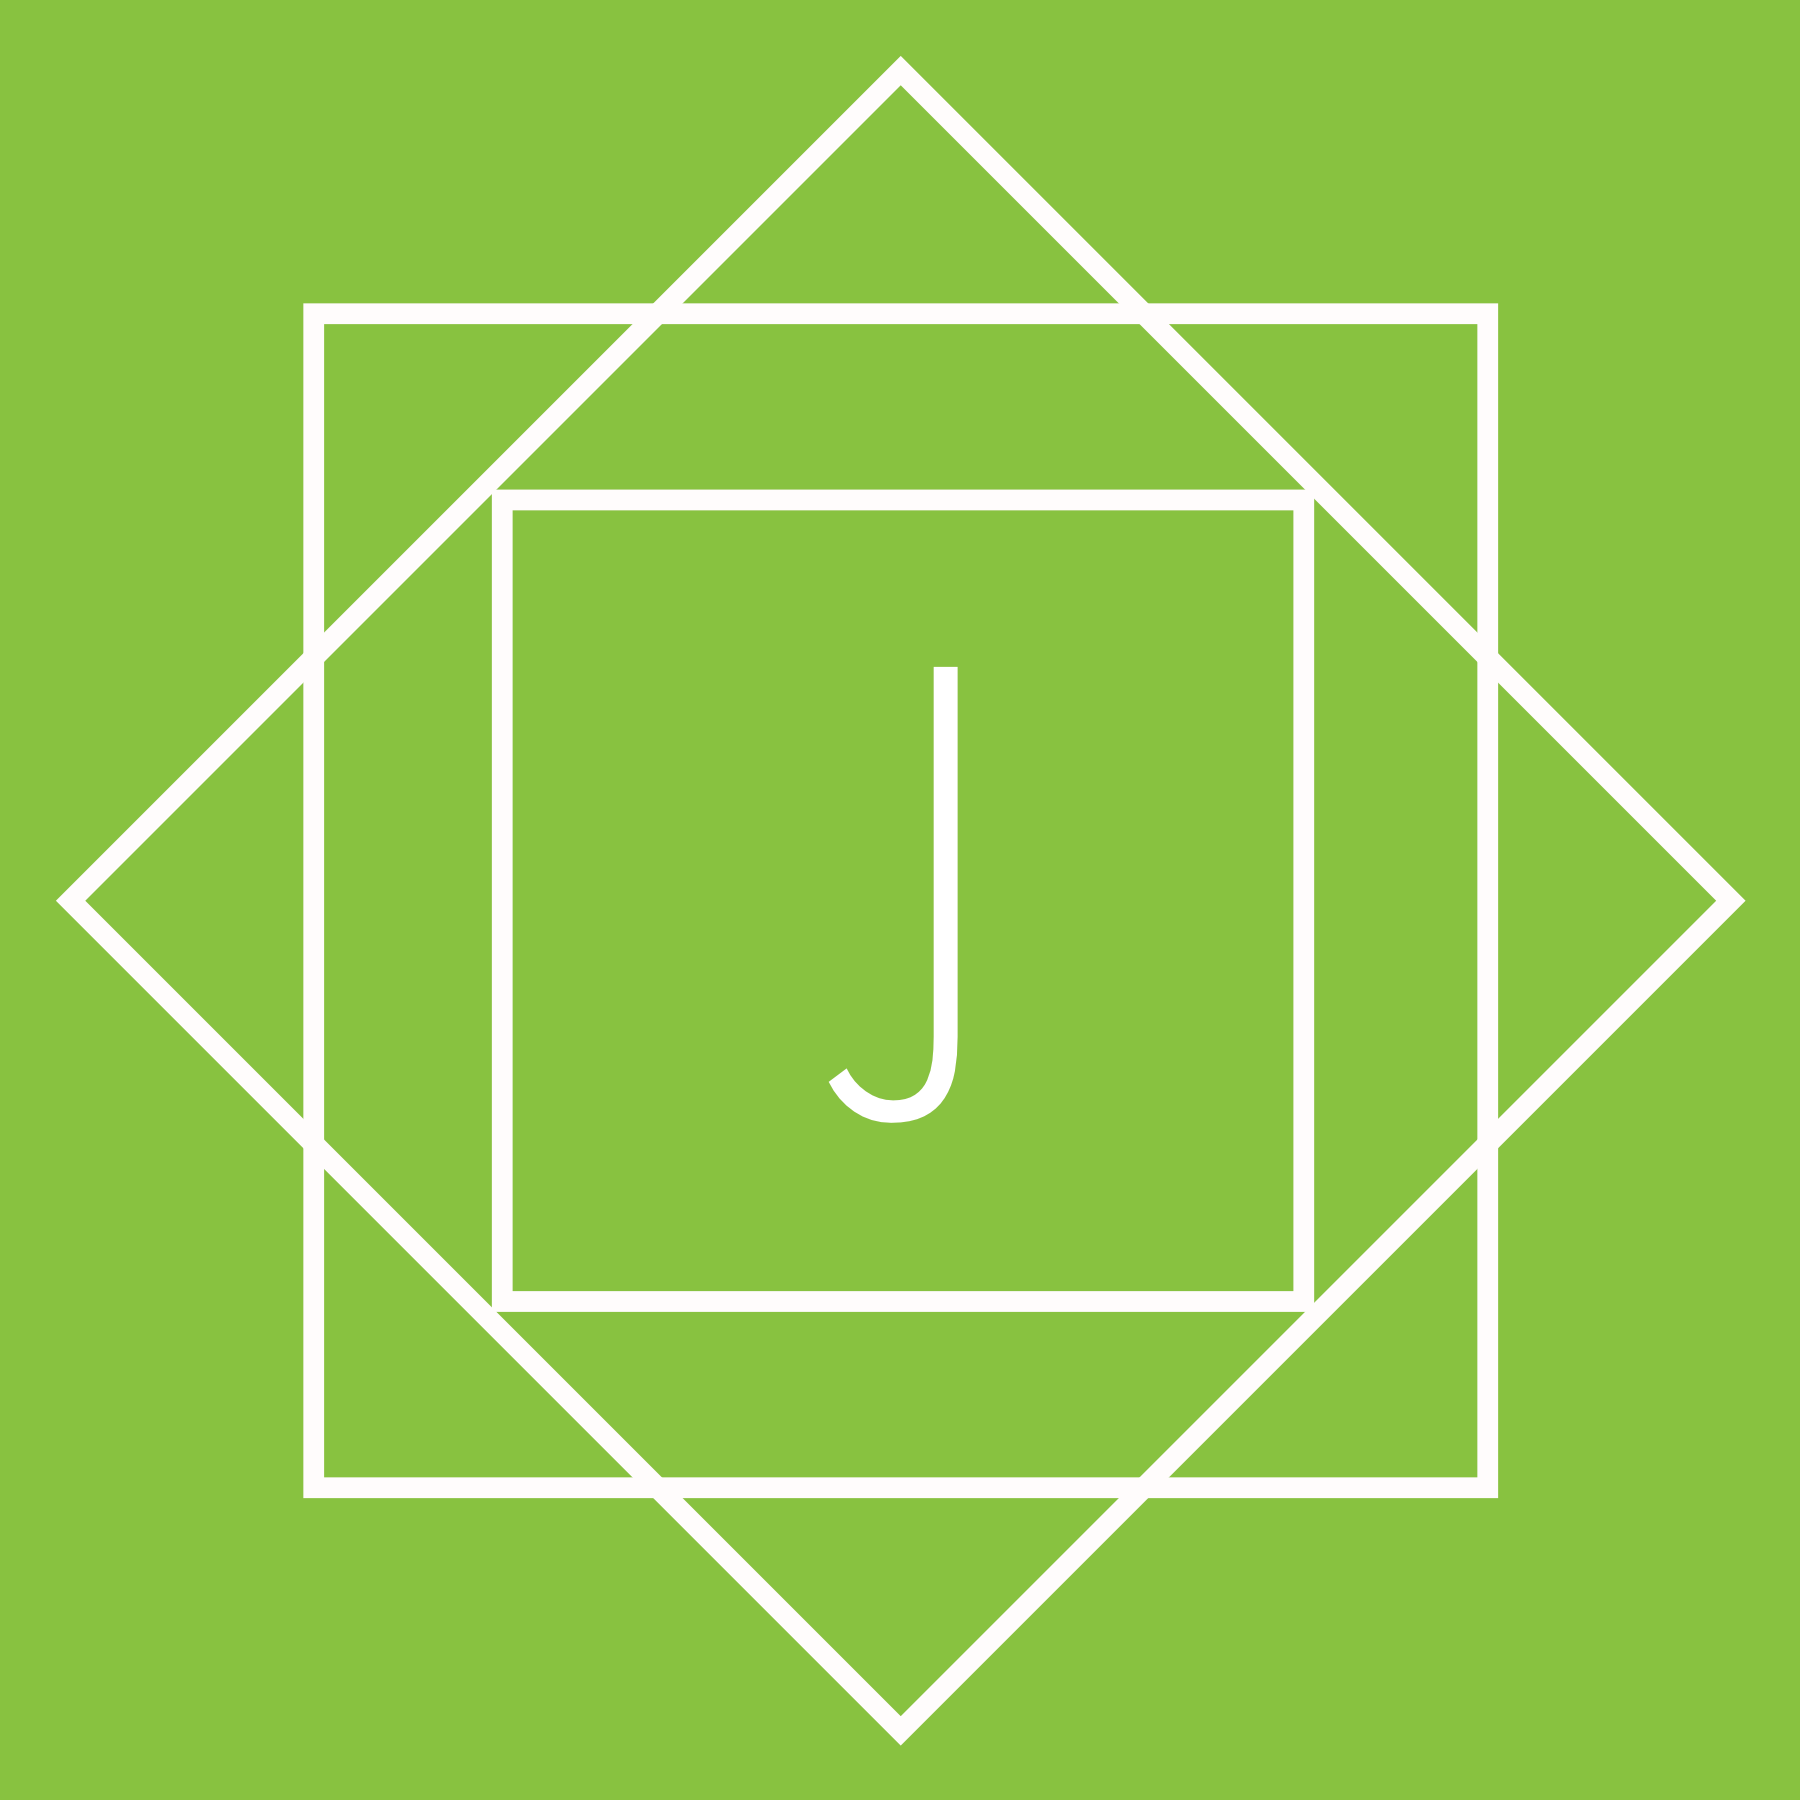 J in QC Symbol Outline - White on Chartreuse.png